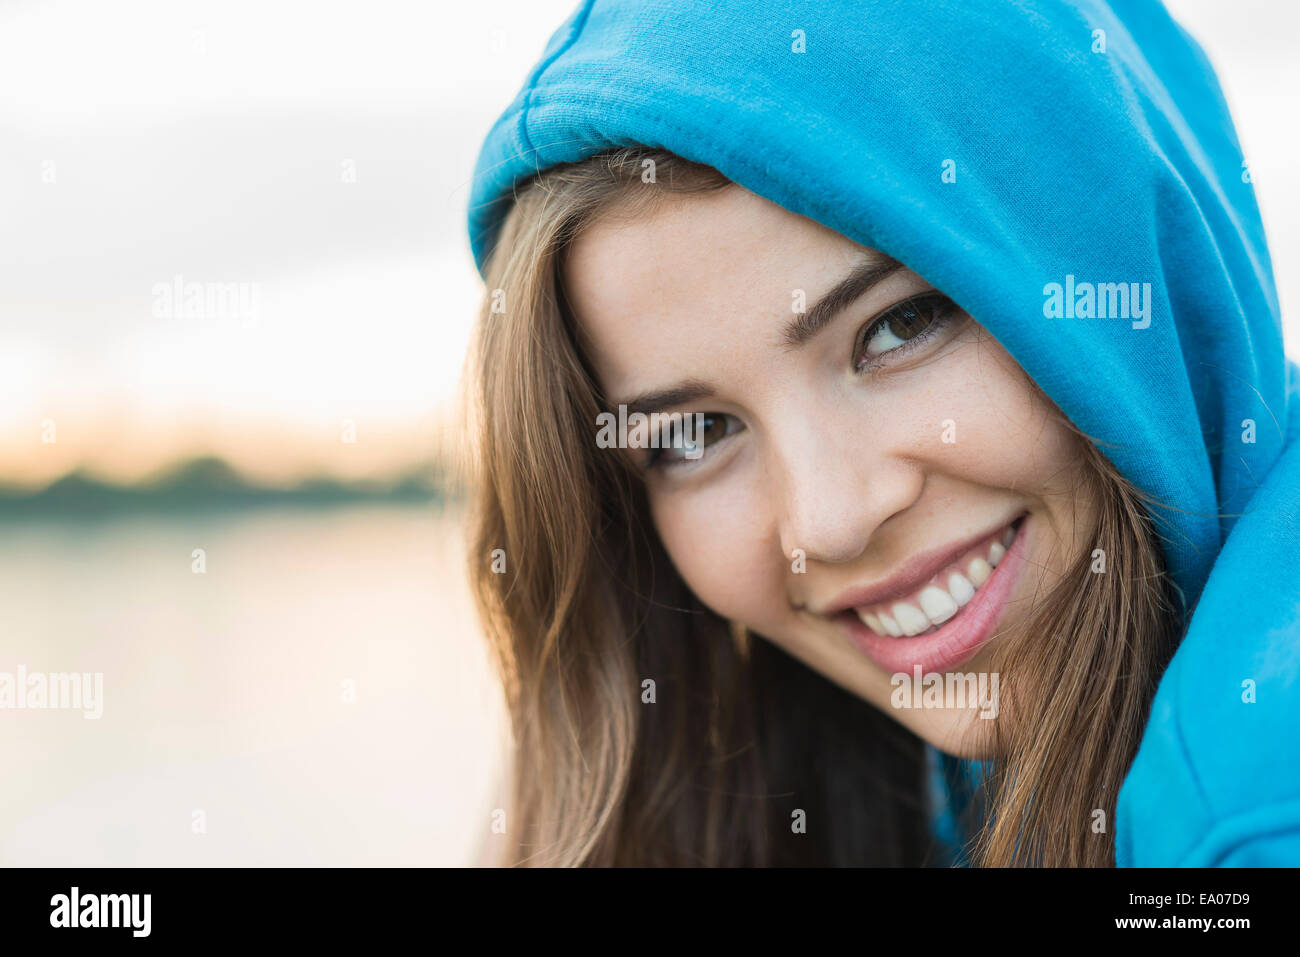 Young woman wearing blue hooded top Stock Photo